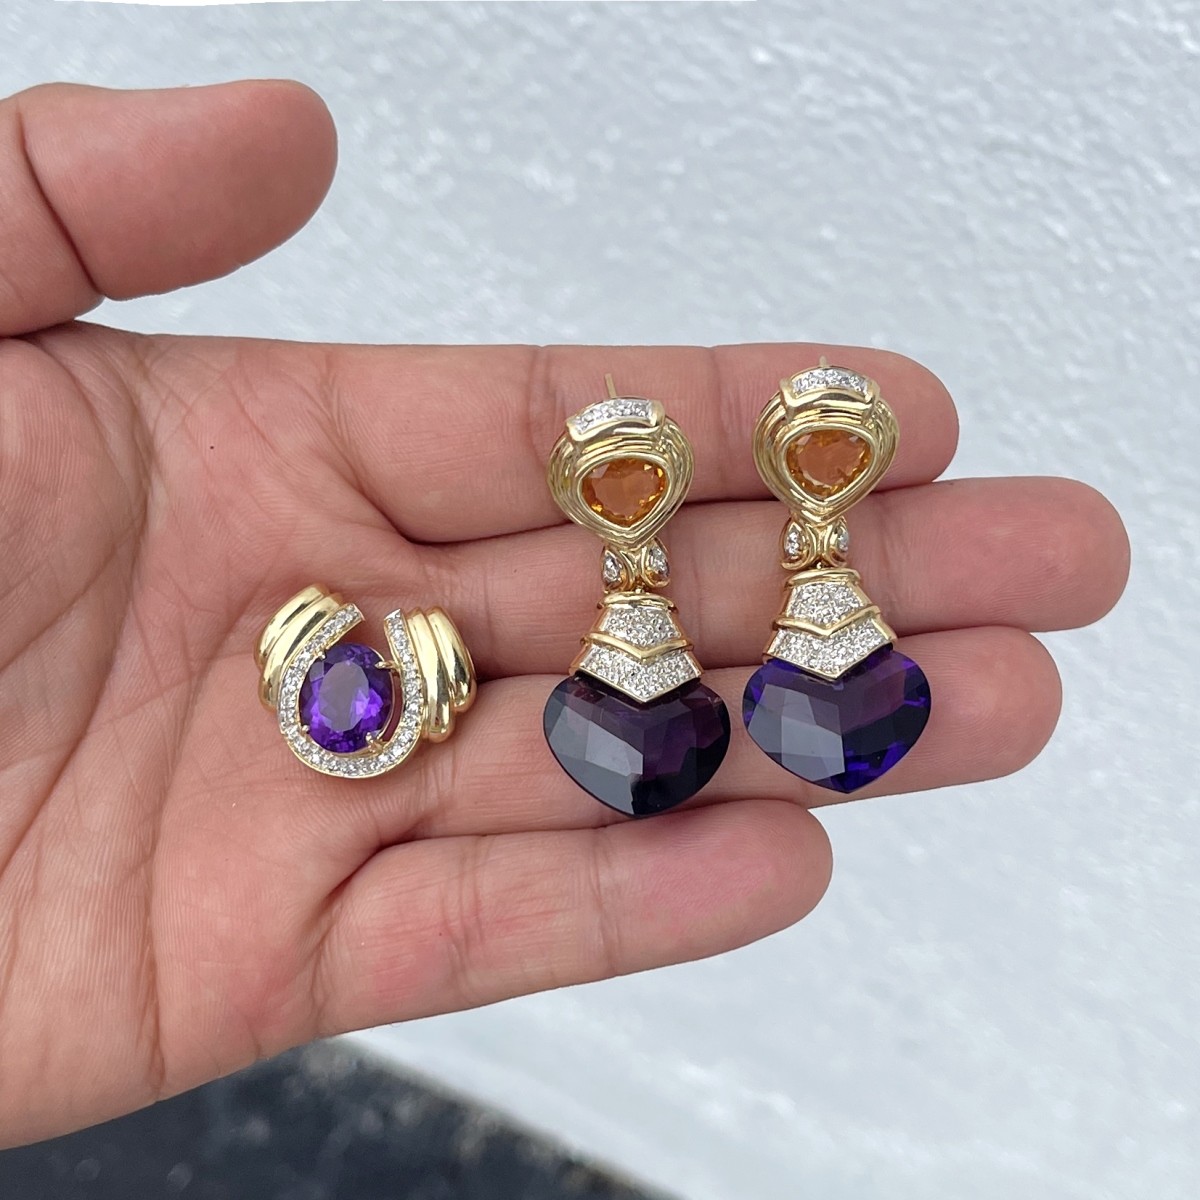 Amethyst and 14K Earrings and Pendant